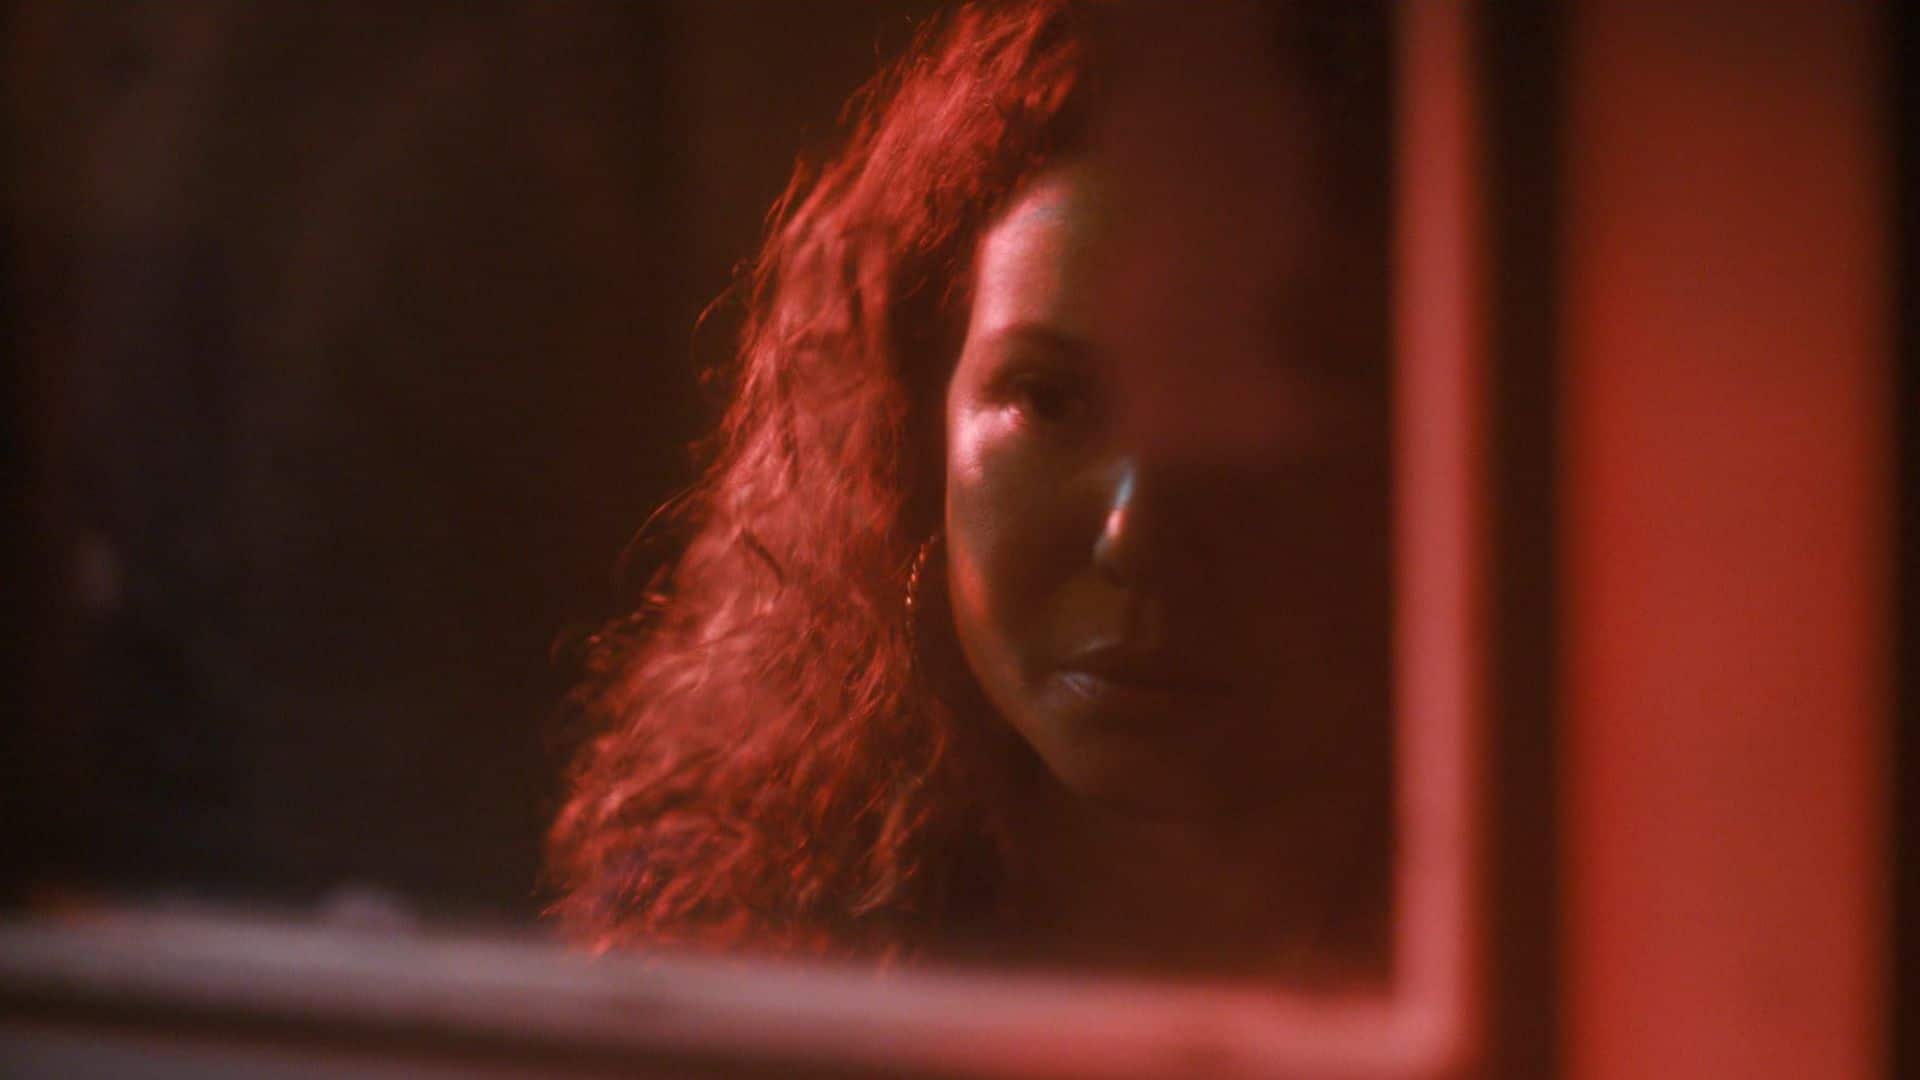 Justina Machado bathed in red light in this image from Amazon Studios